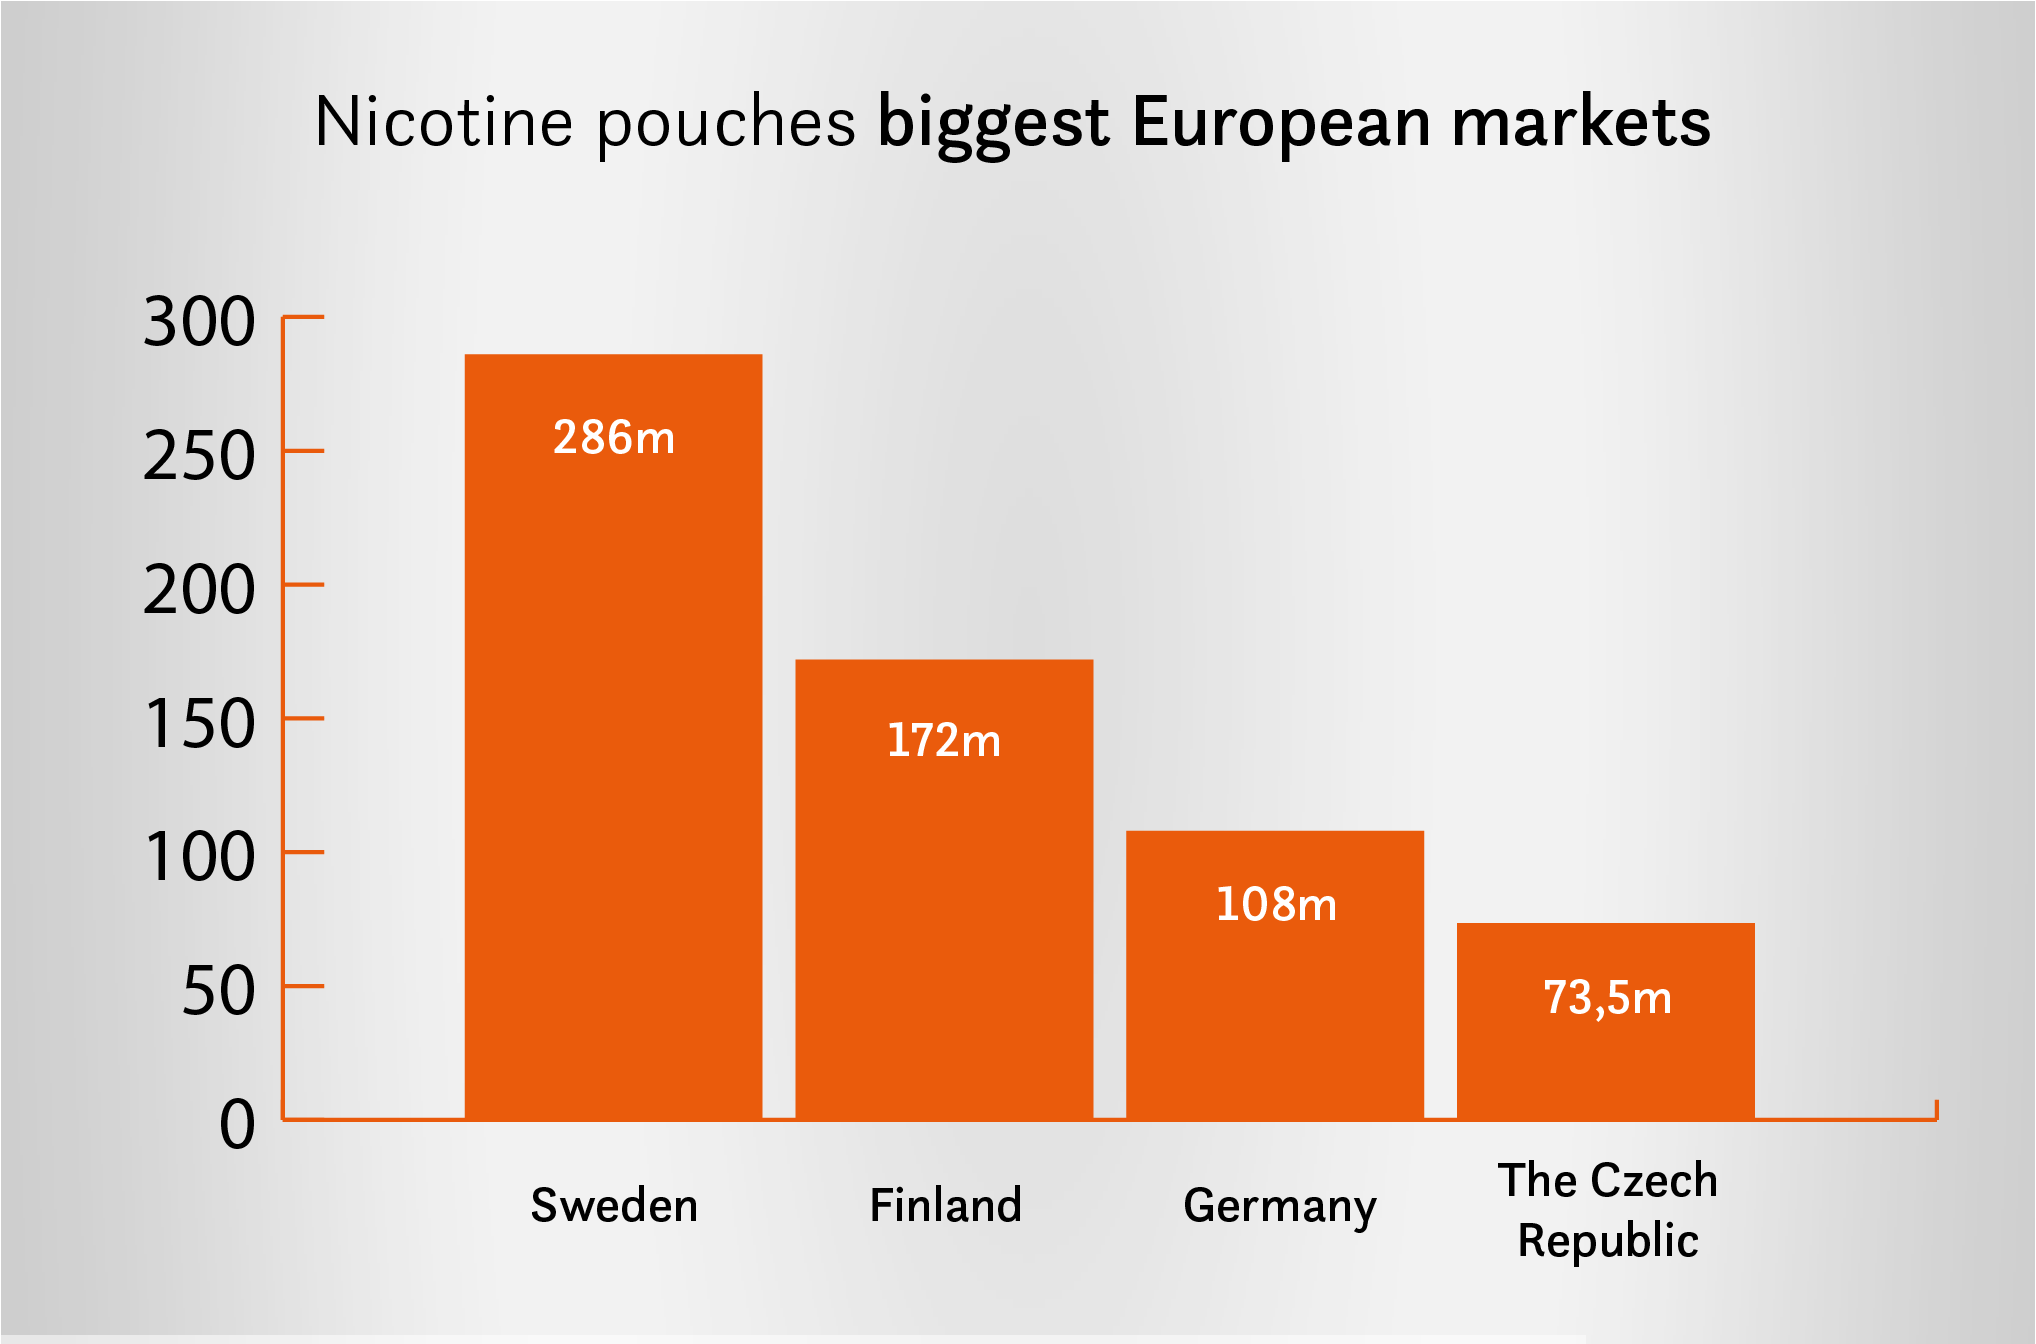 a chart showing net worths of the biggest European nicotine pouches marets: Sweden - 286 m euro; Finland - 172 m euro; Germany - 108 m euro; The Czech Republic - 73,5 m euro